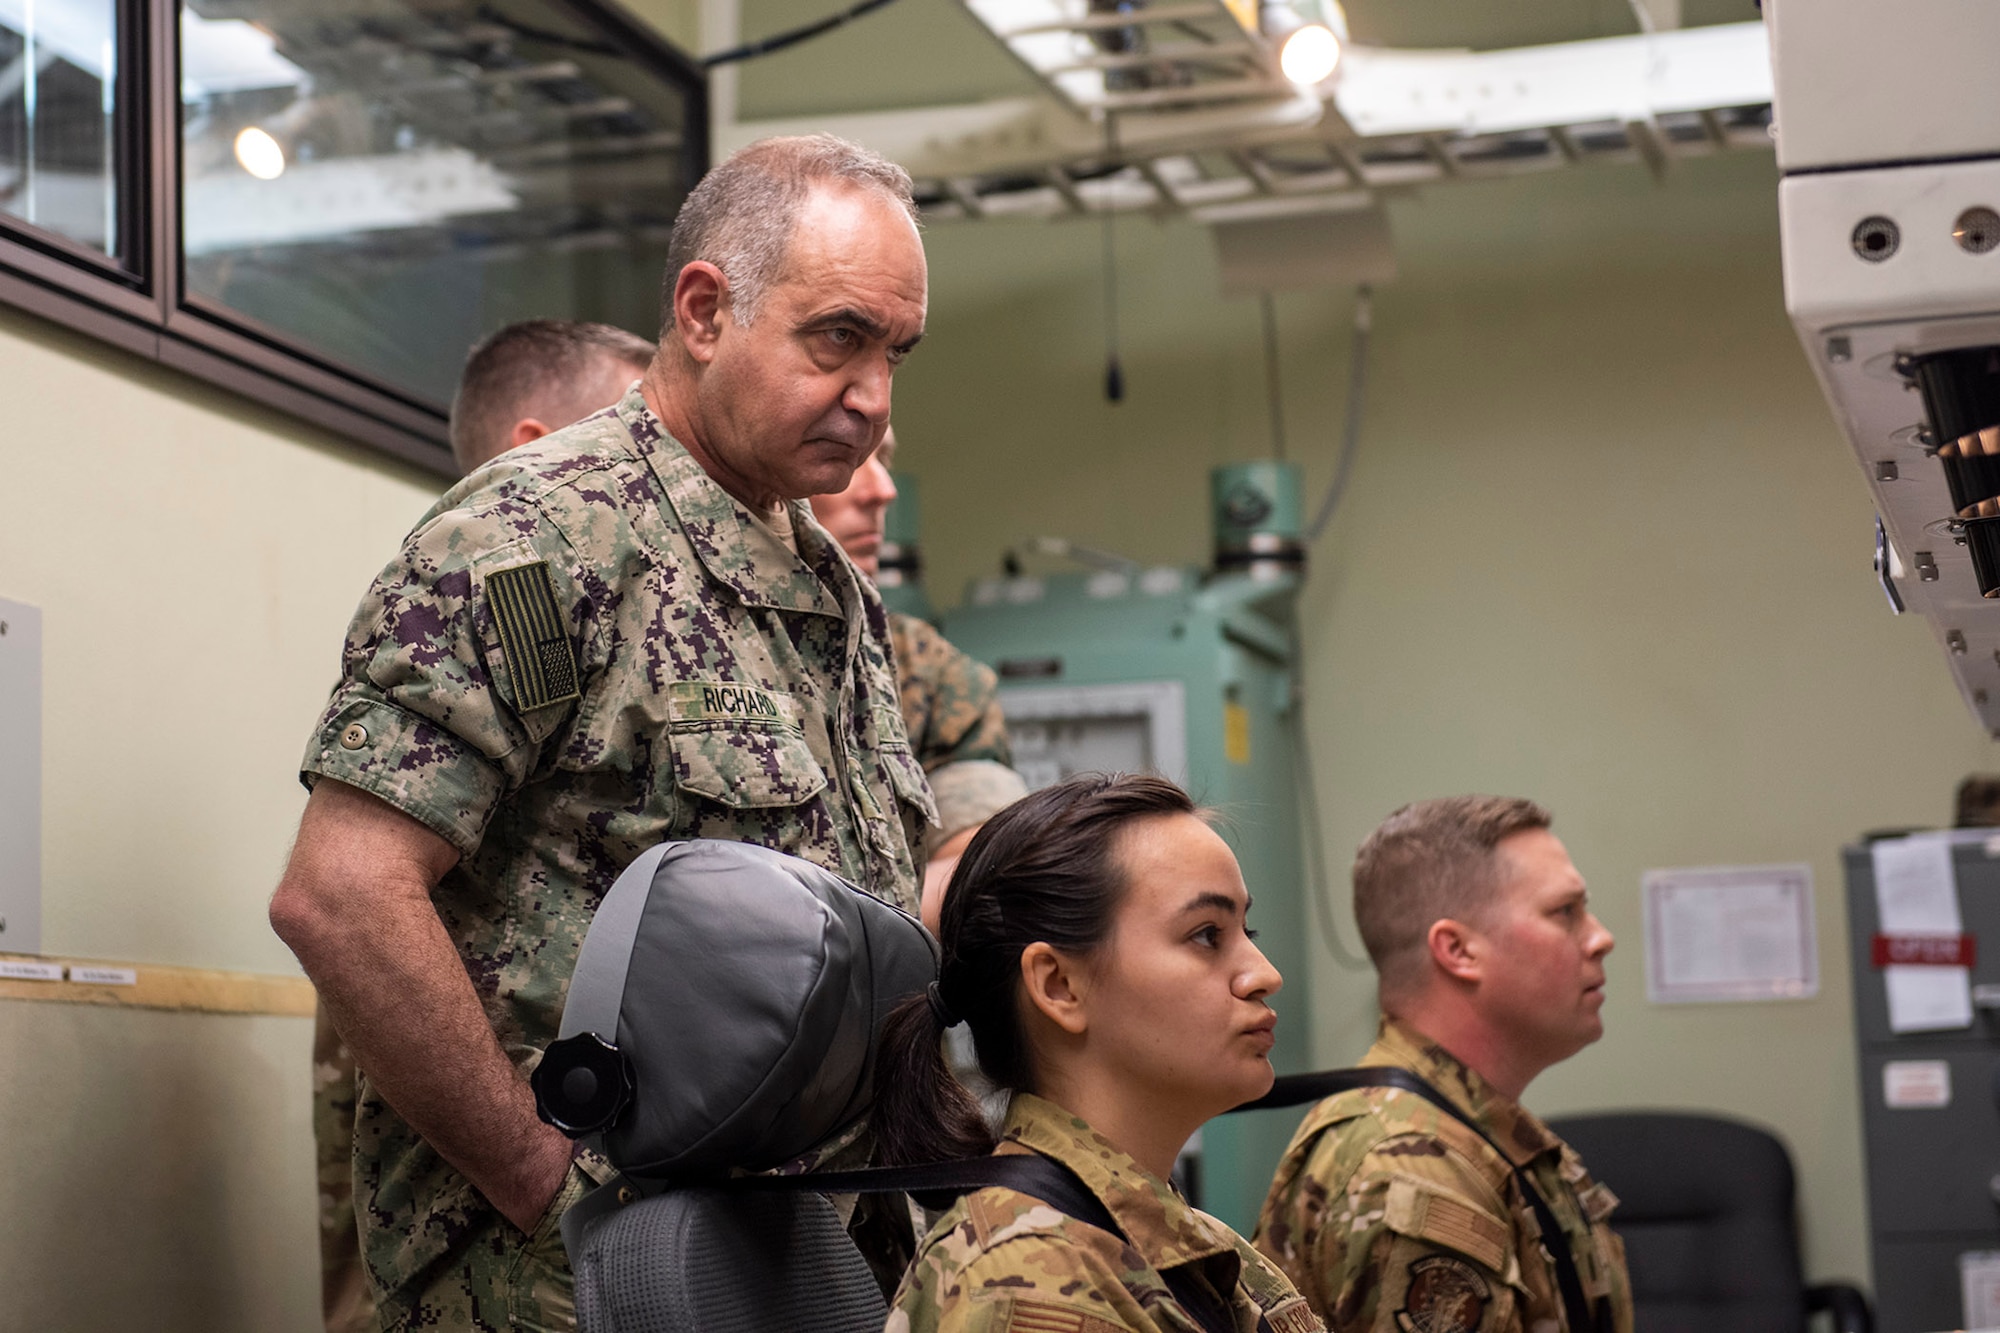 U.S. Navy Adm. Charles Richard, commander of U.S. Strategic Command, observes during a training scenario May 6, 2022, at Malmstrom Air Force Base, Mont. He also toured facilities and met with senior enlisted leaders. (U.S. Air Force photo by Airman 1st Class Elijah Van Zandt)